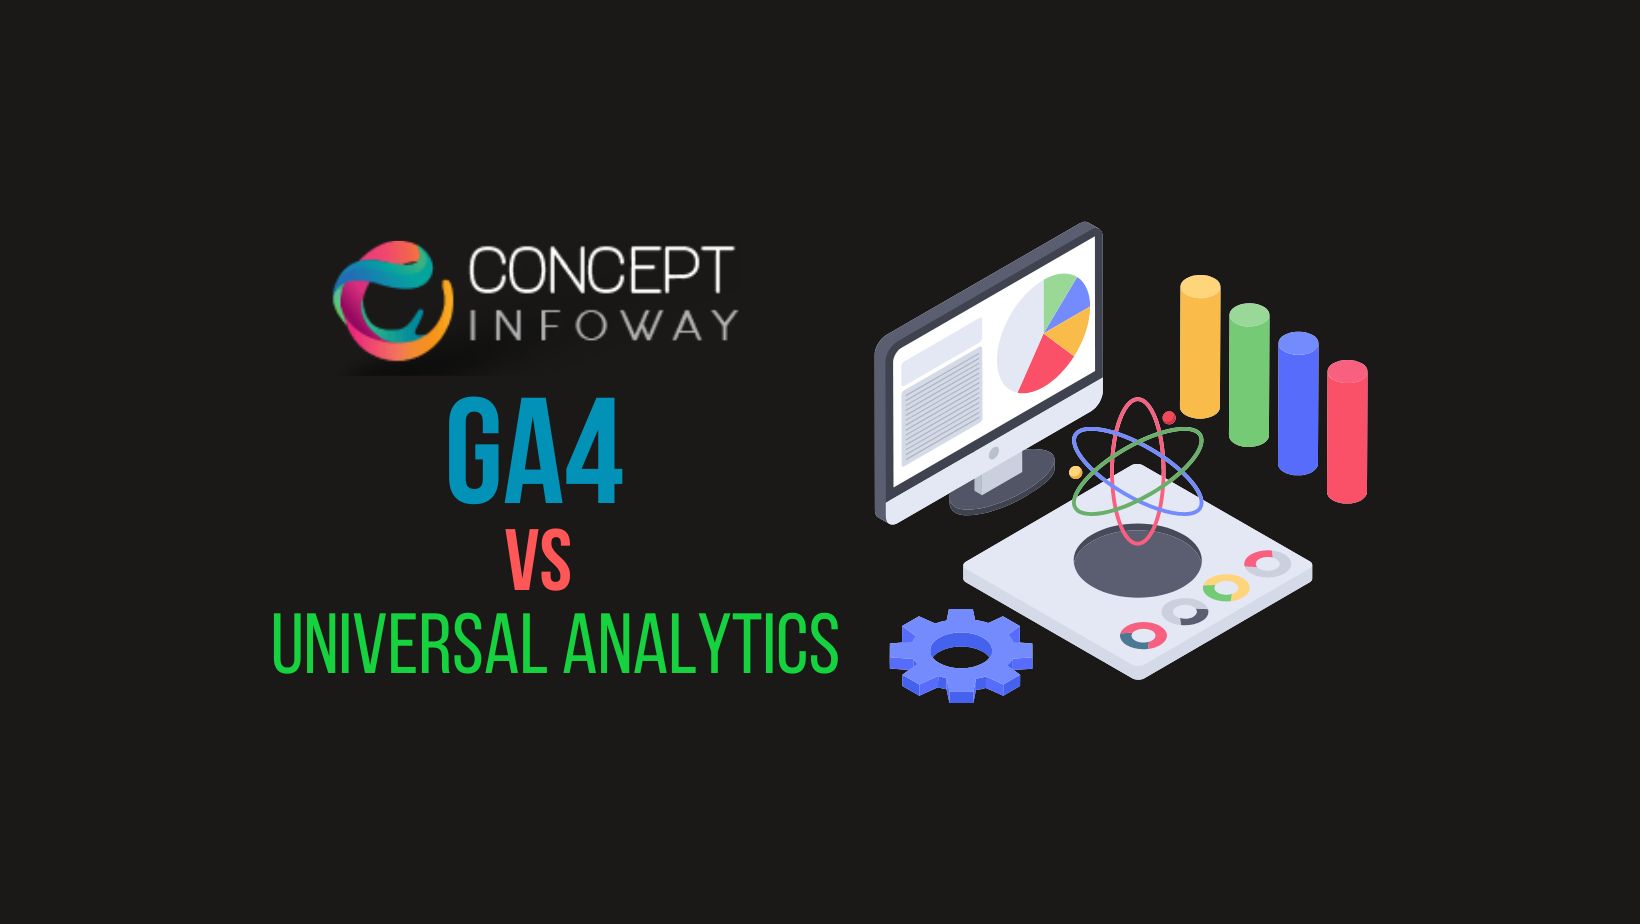 What is the Difference between GA4 vs Universal Analytics?